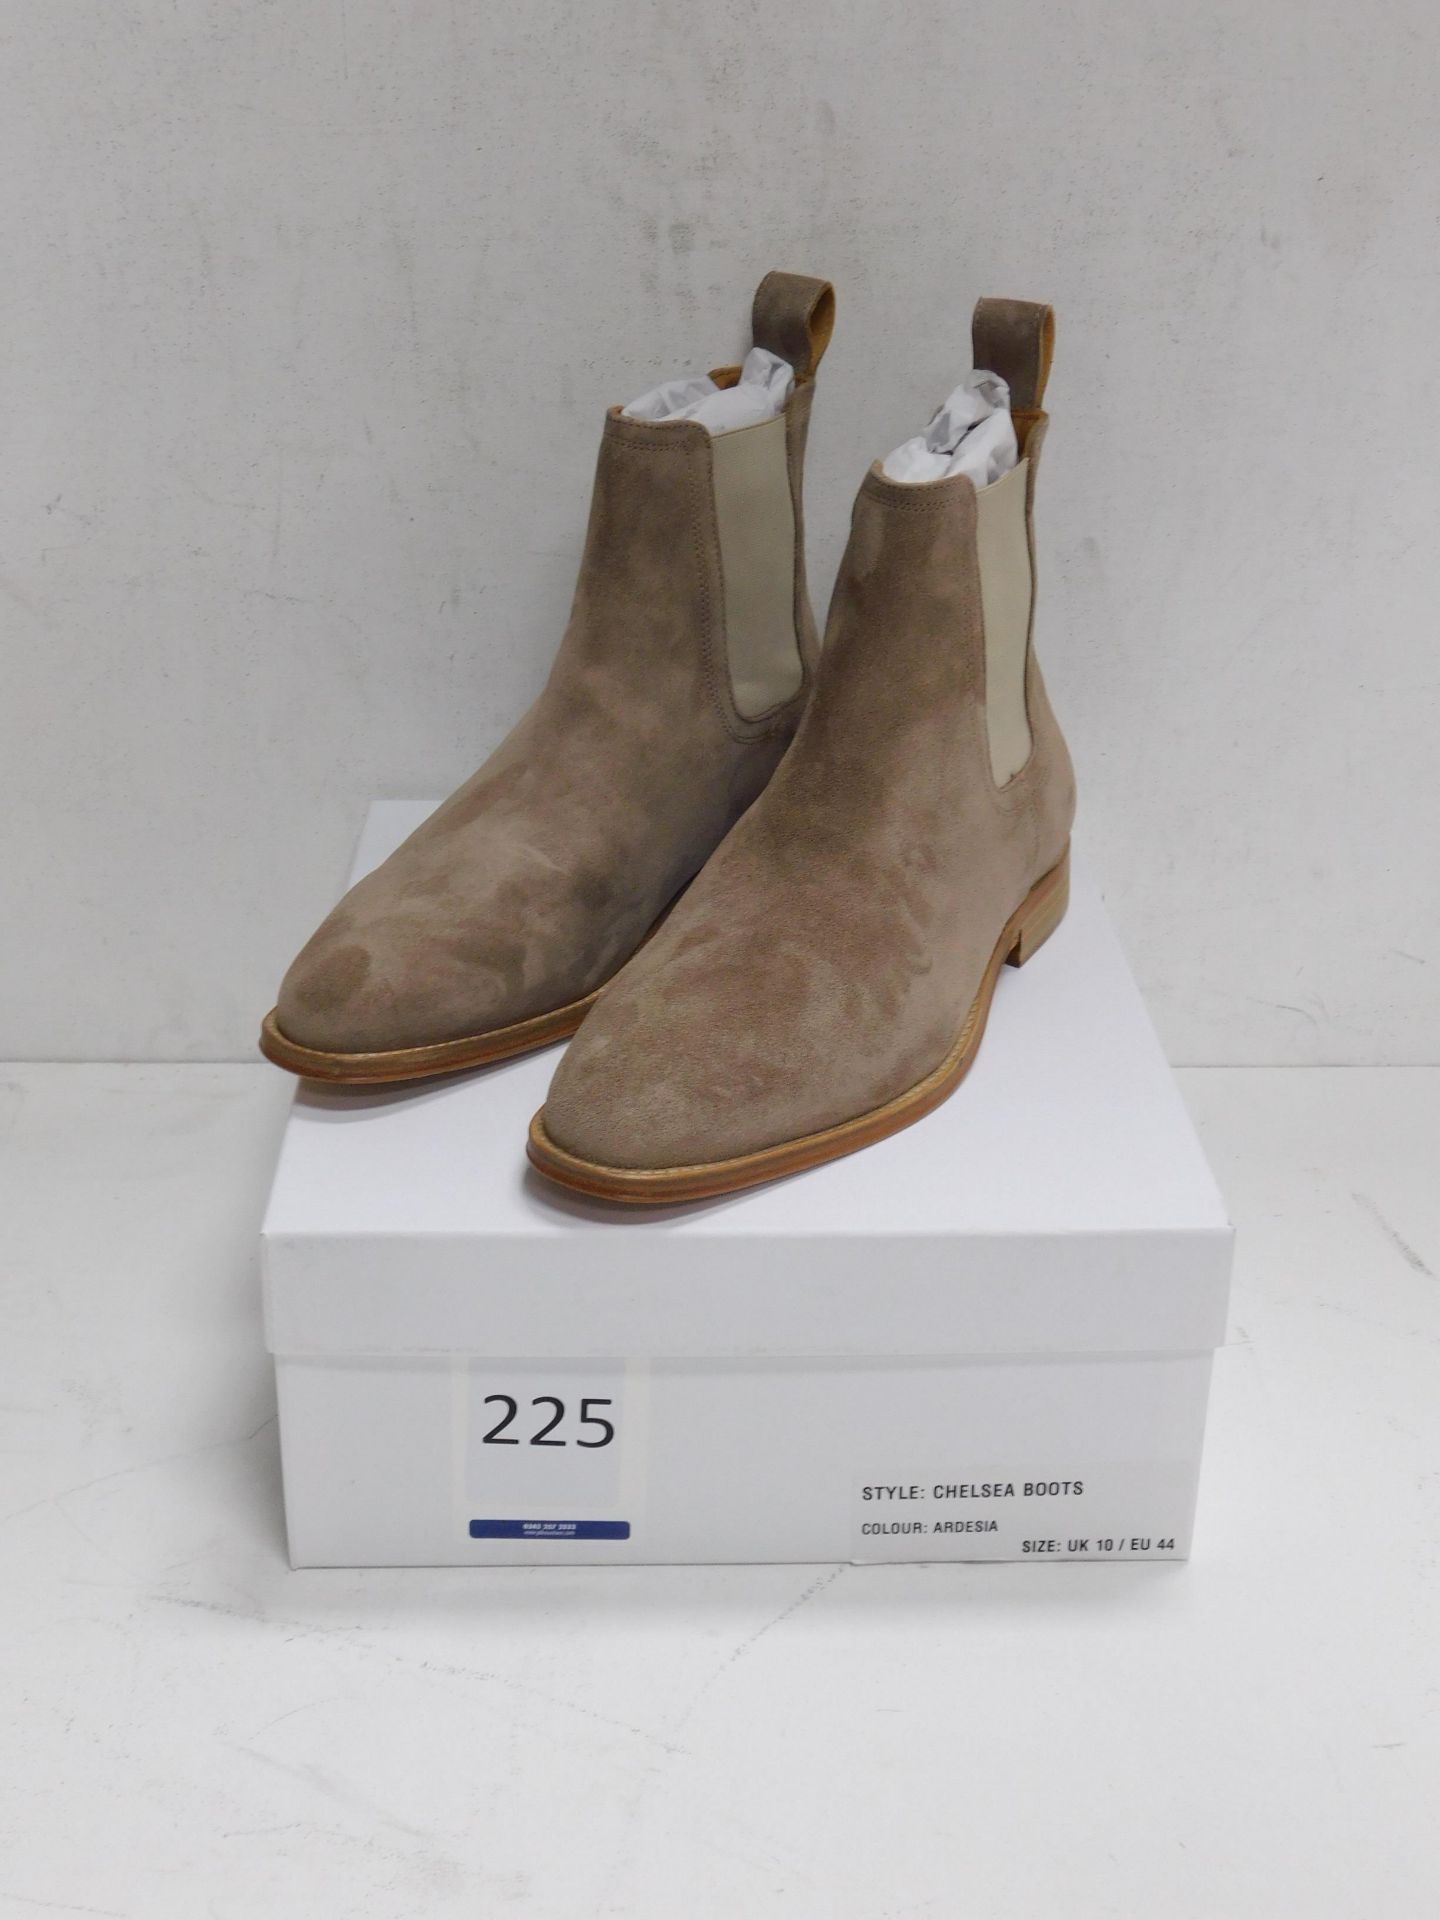 Pair of Ardent “Ardesia” Chelsea Boots, Size 10 (Located: Brentwood. Please Refer to General Notes)